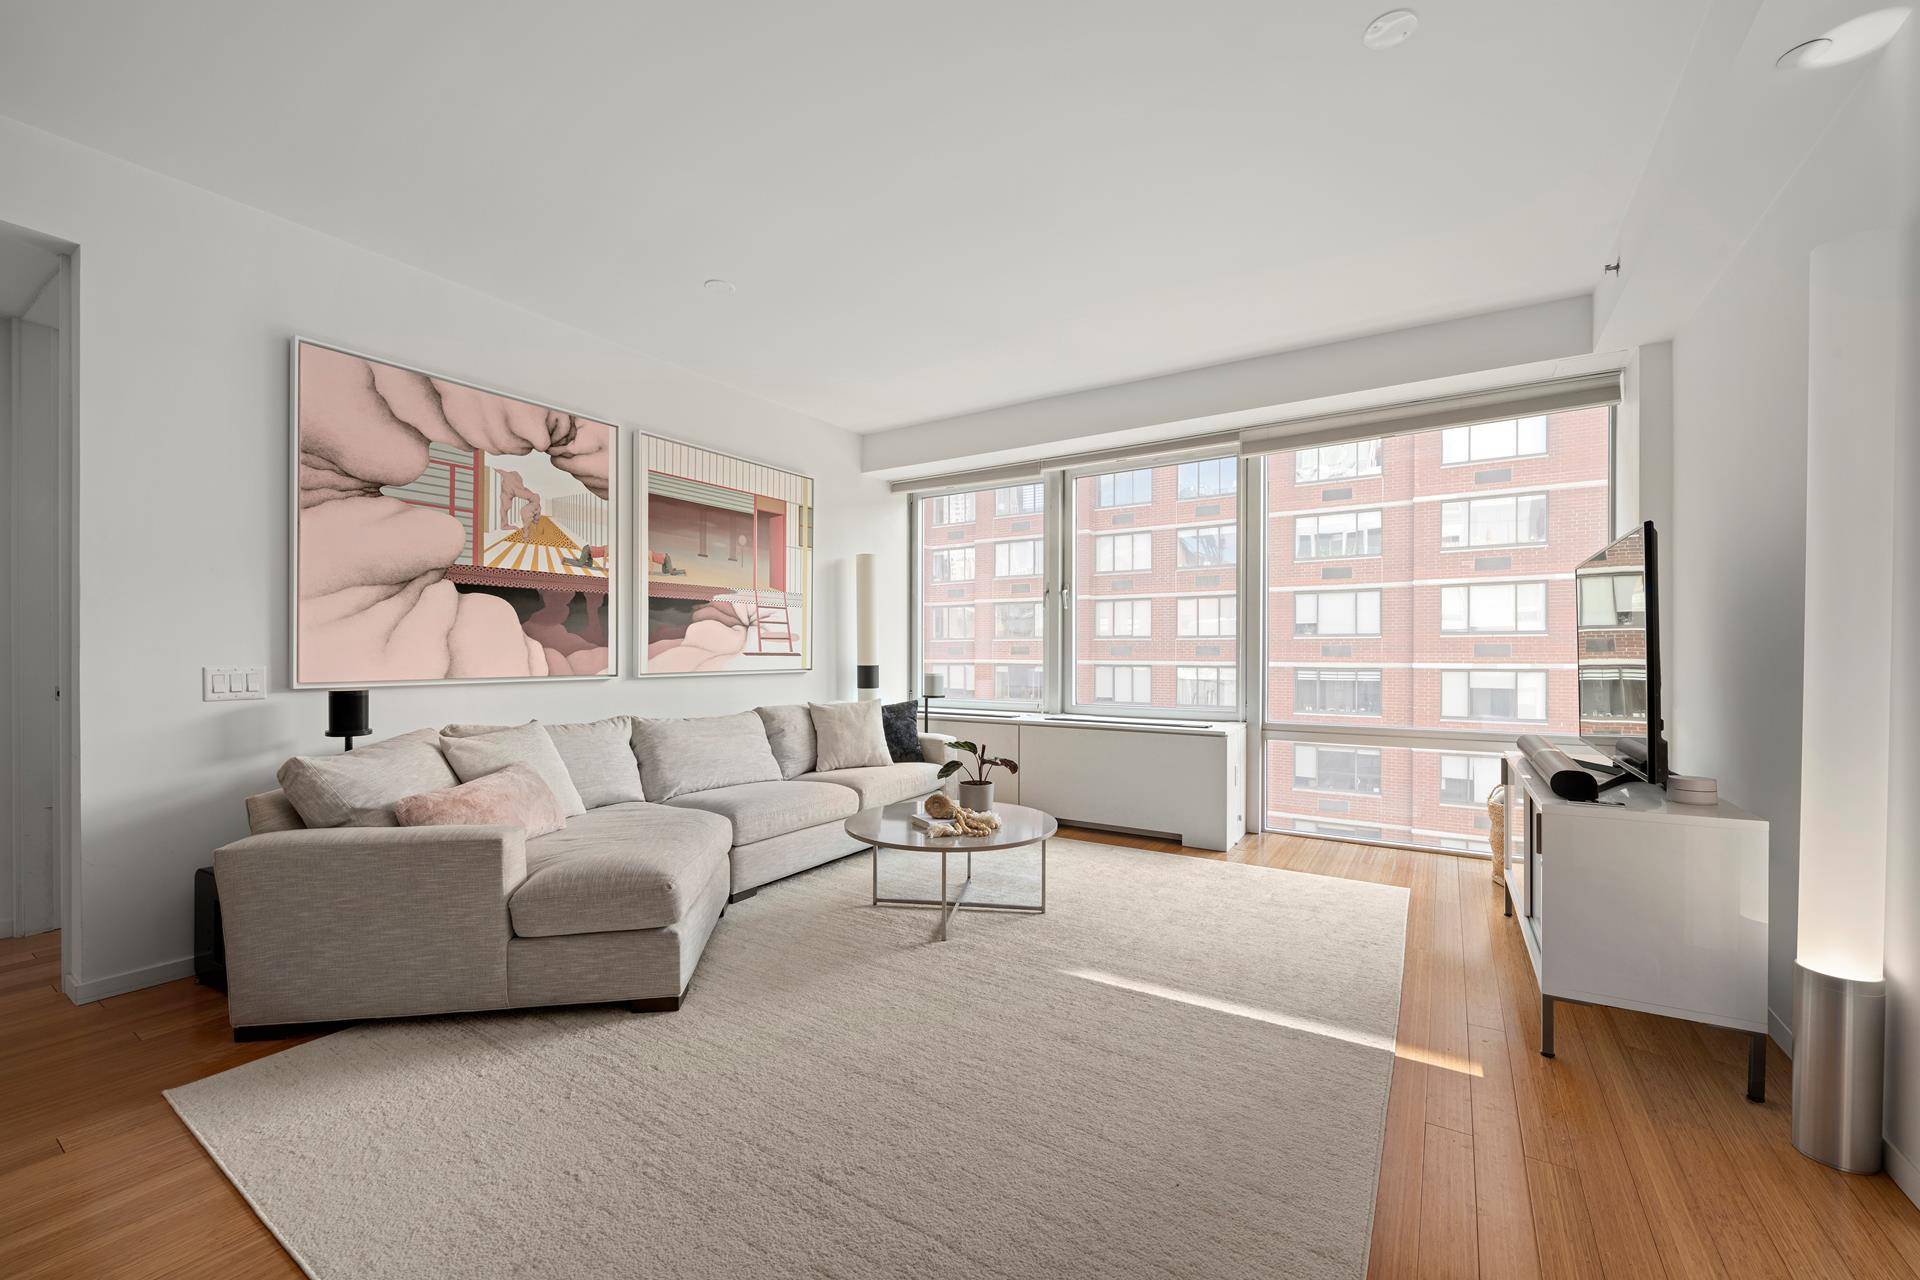 Welcome to this impeccable two bedroom condominium with a doorman located in the heart of Chelsea, boasting a variety of features perfect for contemporary living.